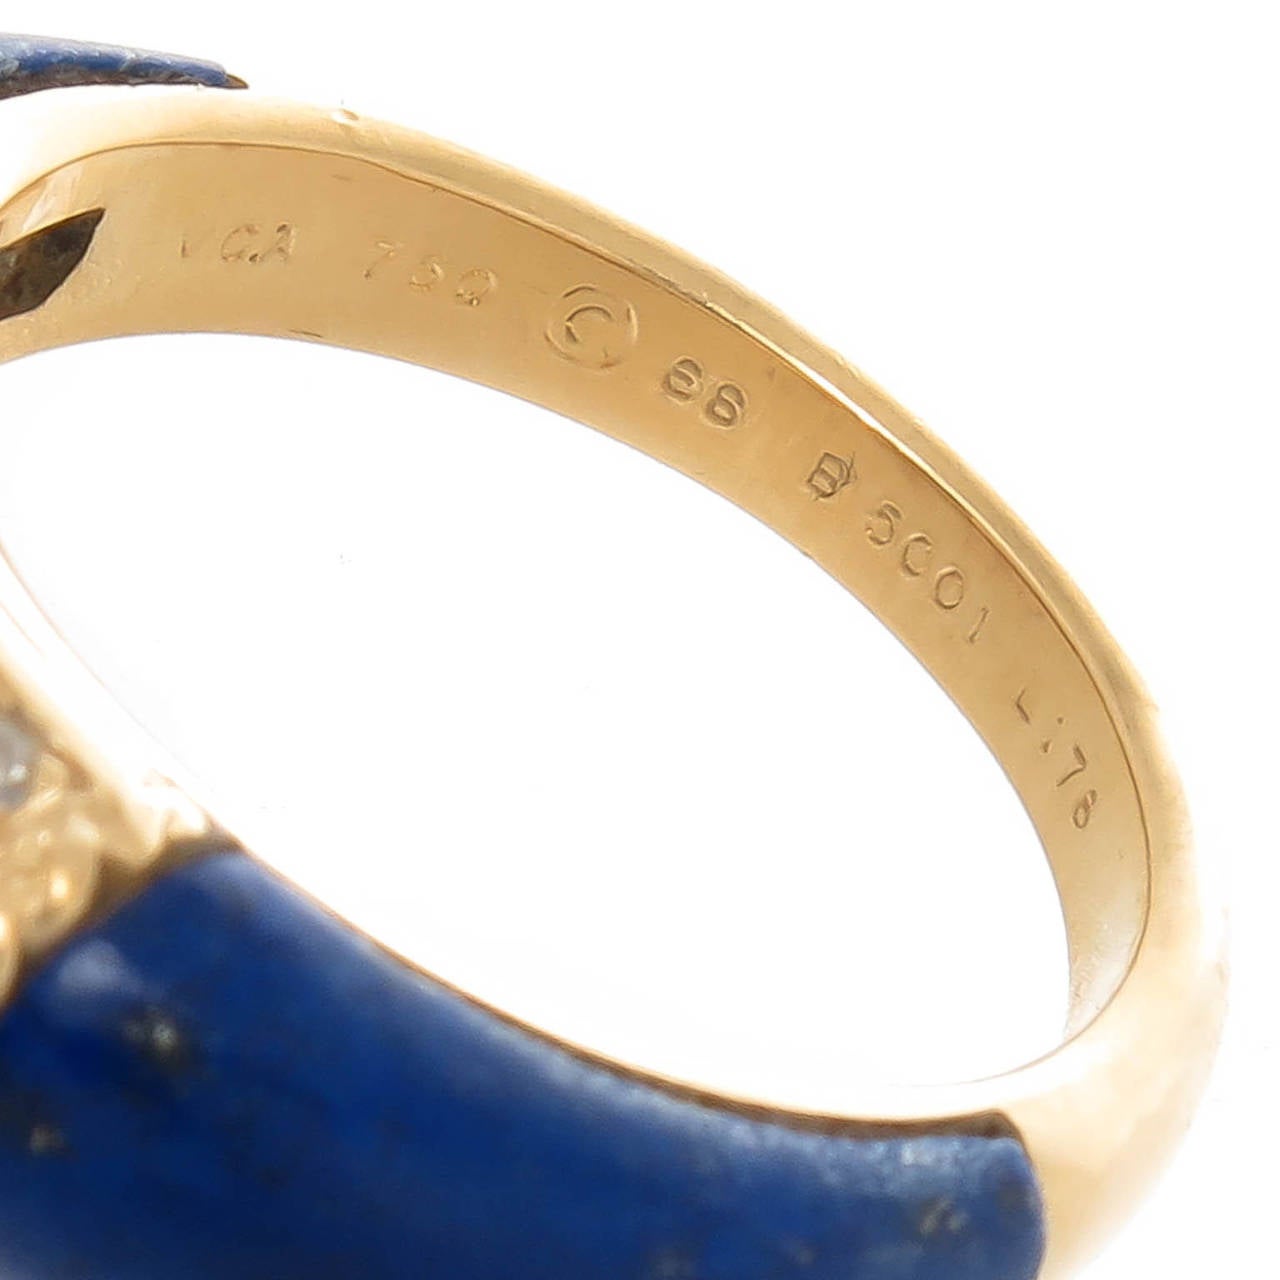 Circa 1990s Van Cleef and Arpels 18K yellow Gold Philippines Ring, set with Bright Blue Lapis Lazulli and Further set with Round Diamonds totaling 1/2 Carat. Signed, Numbered and Having French Hall Marks. Finger Size = 6 1/2